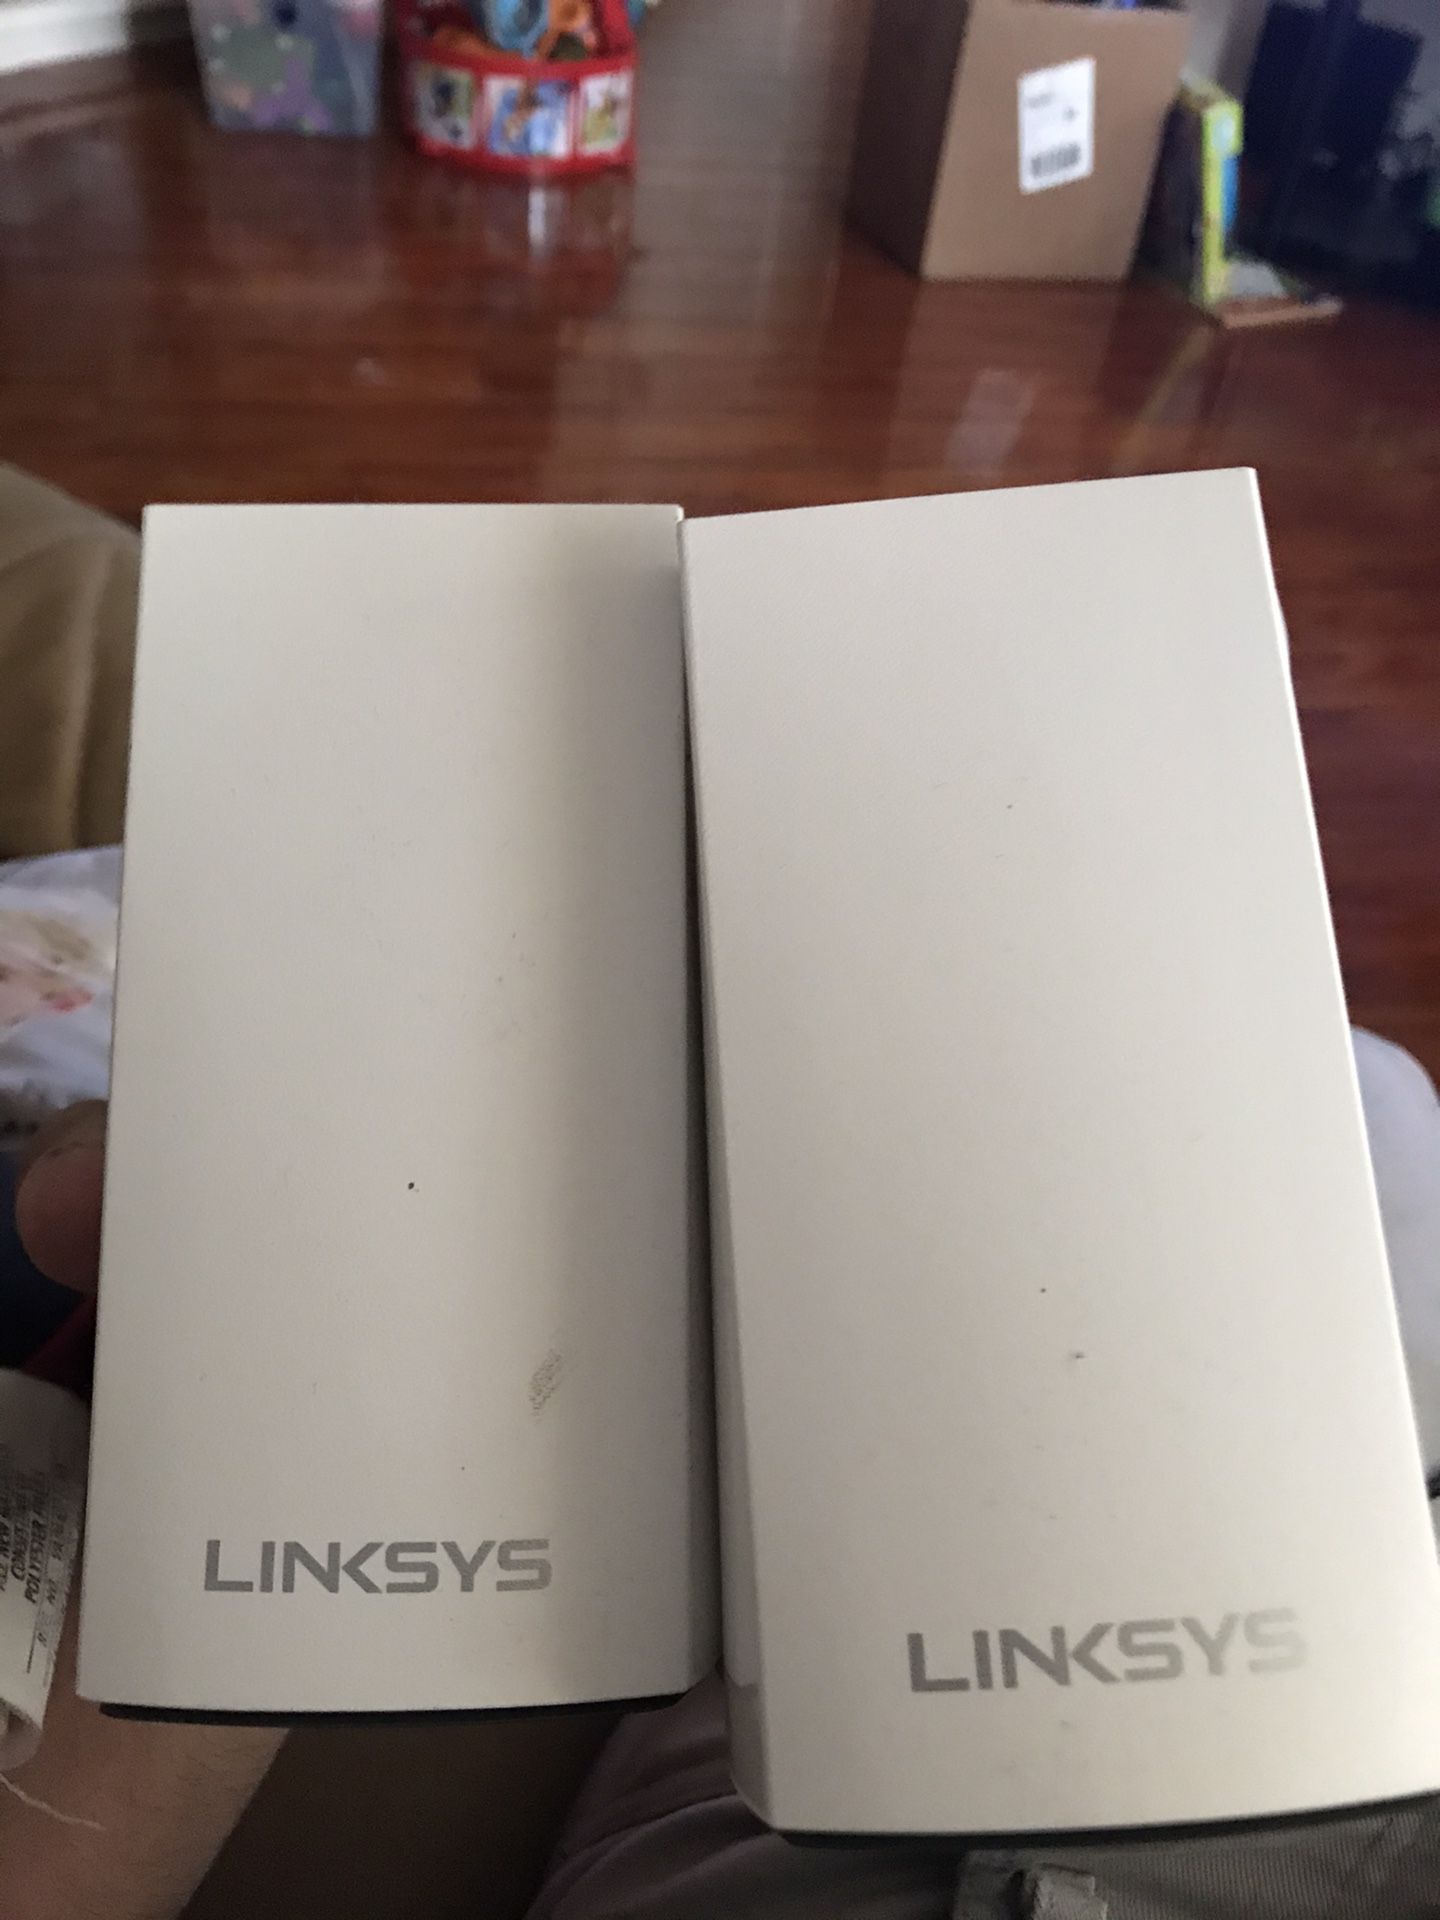 Linksys internet router